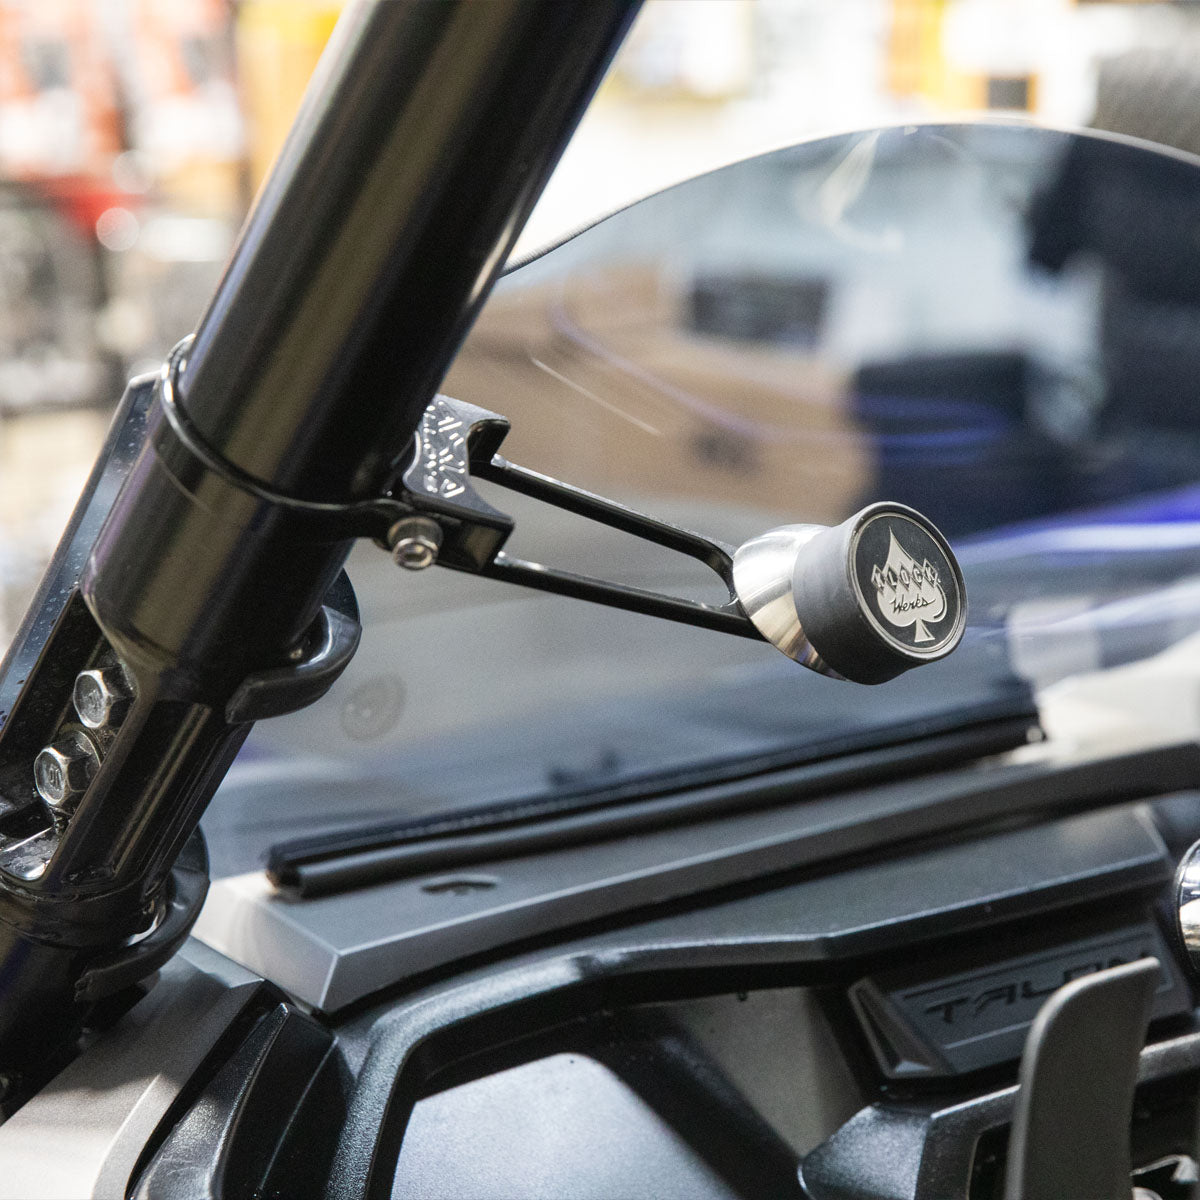 2" Offset Roll Cage Magnetic Phone Mount shown on KHonda Talon side by side(2" Mount shown on Honda Talon)